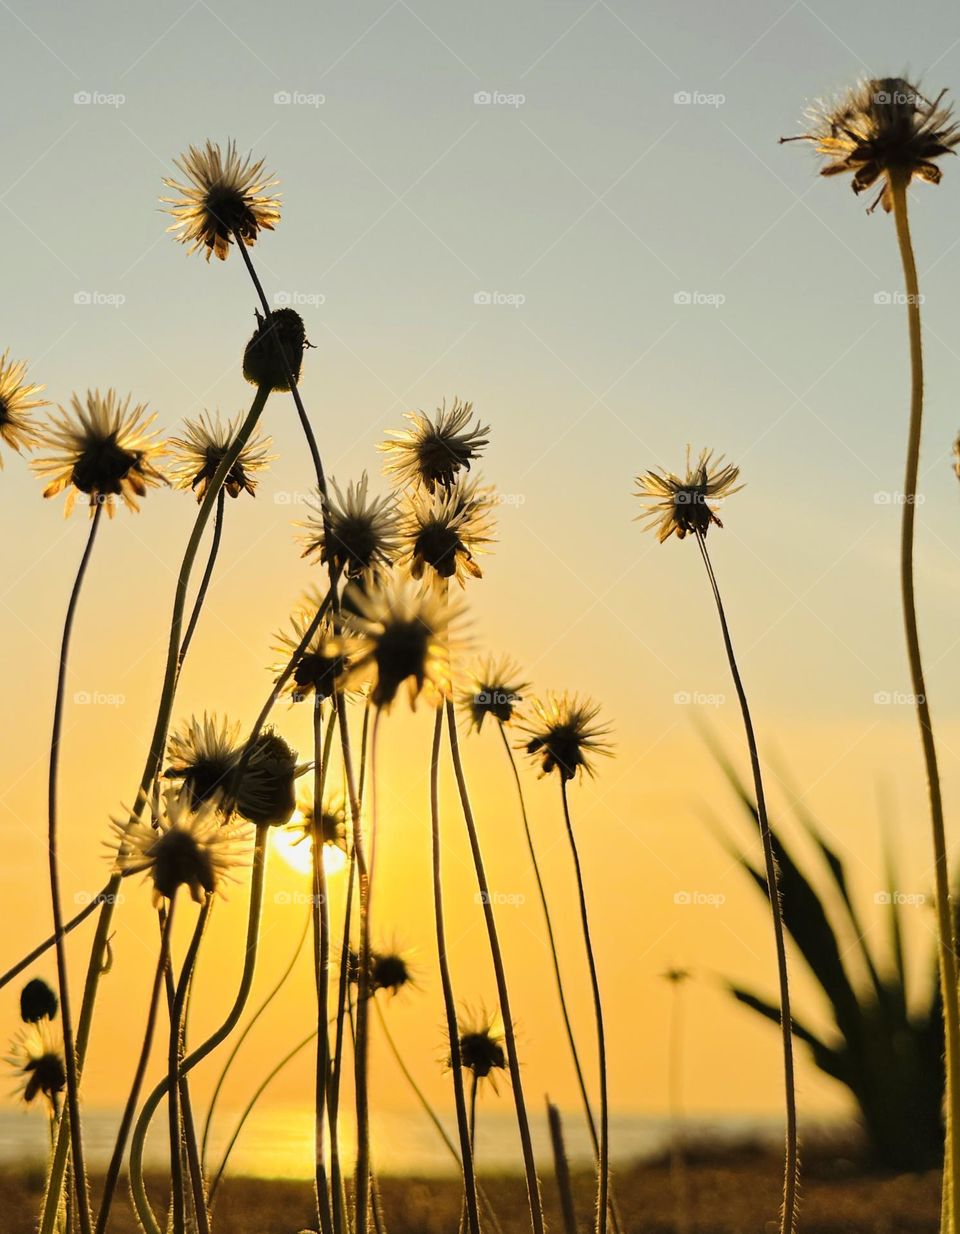 The photo shows silhouetted wildflowers against a golden sky during sunset, with the light outlining the delicate details of the flowers’ seed heads.